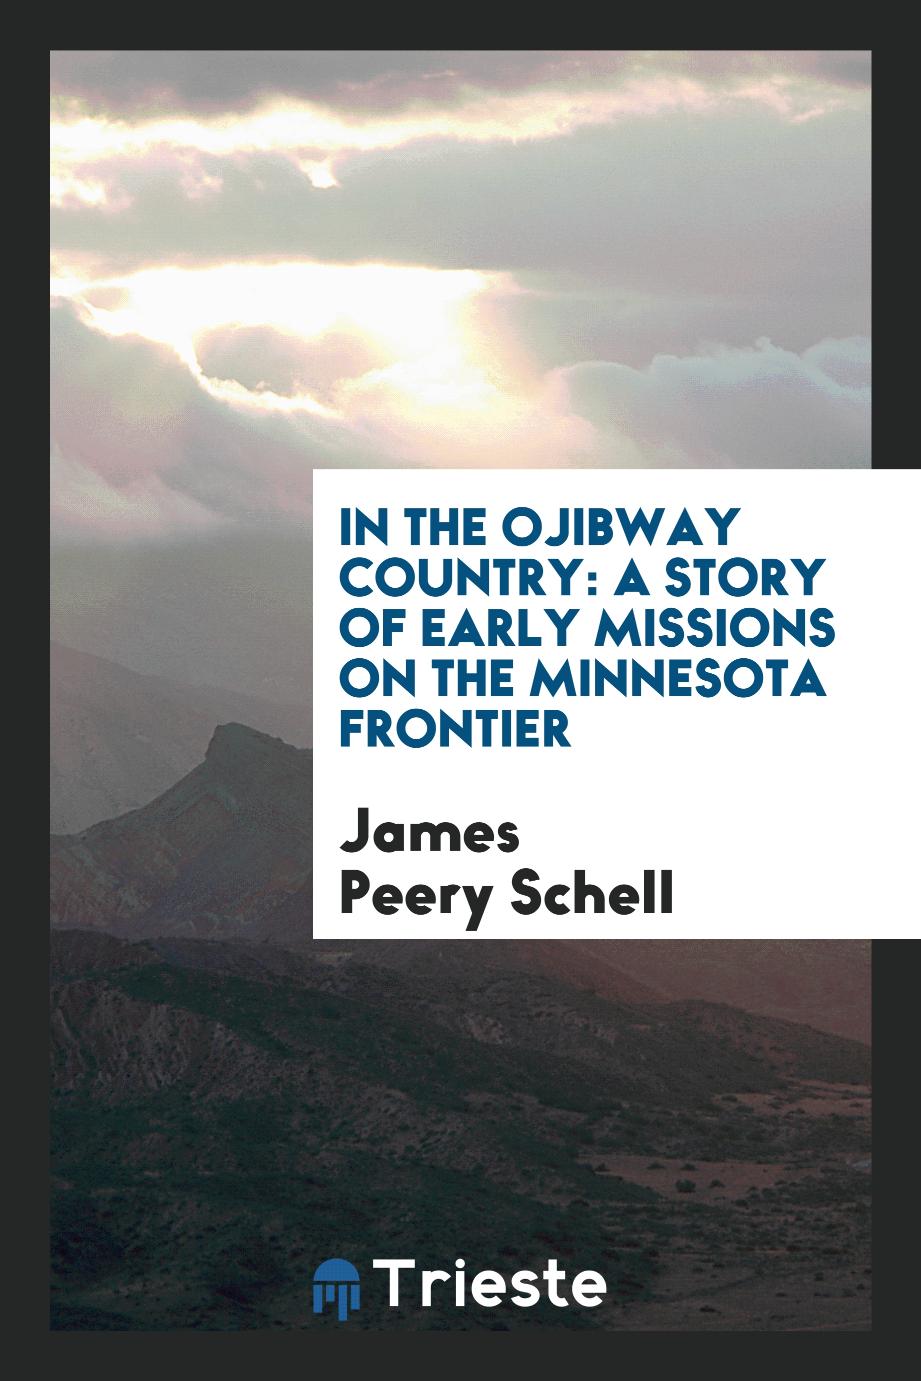 In the Ojibway country: a story of early missions on the Minnesota frontier